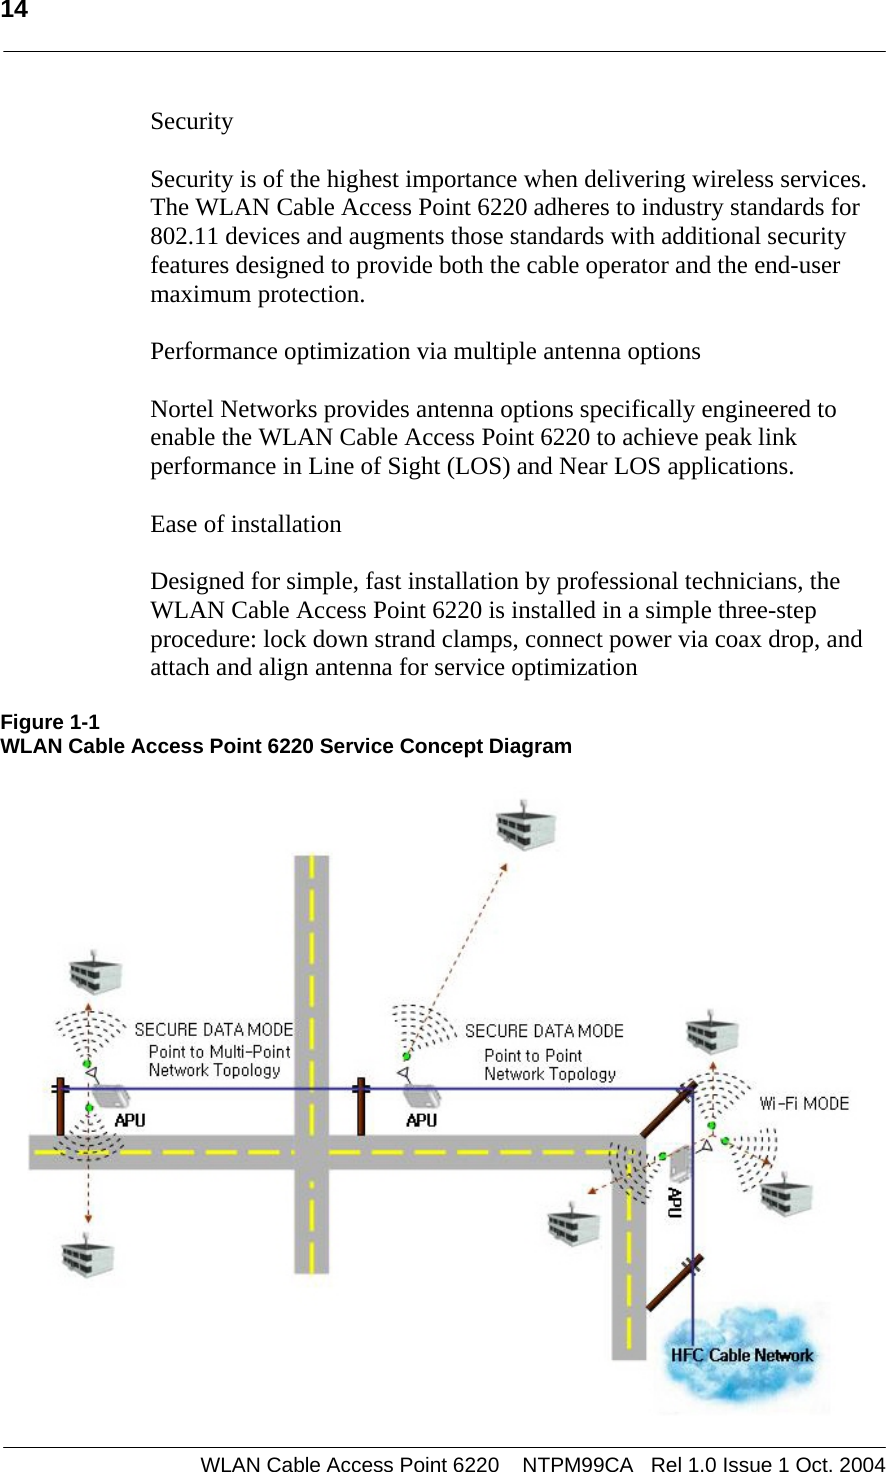   14    Security  Security is of the highest importance when delivering wireless services. The WLAN Cable Access Point 6220 adheres to industry standards for 802.11 devices and augments those standards with additional security features designed to provide both the cable operator and the end-user maximum protection.  Performance optimization via multiple antenna options  Nortel Networks provides antenna options specifically engineered to enable the WLAN Cable Access Point 6220 to achieve peak link performance in Line of Sight (LOS) and Near LOS applications.  Ease of installation  Designed for simple, fast installation by professional technicians, the WLAN Cable Access Point 6220 is installed in a simple three-step procedure: lock down strand clamps, connect power via coax drop, and attach and align antenna for service optimization  Figure 1-1 WLAN Cable Access Point 6220 Service Concept Diagram    WLAN Cable Access Point 6220    NTPM99CA   Rel 1.0 Issue 1 Oct. 2004